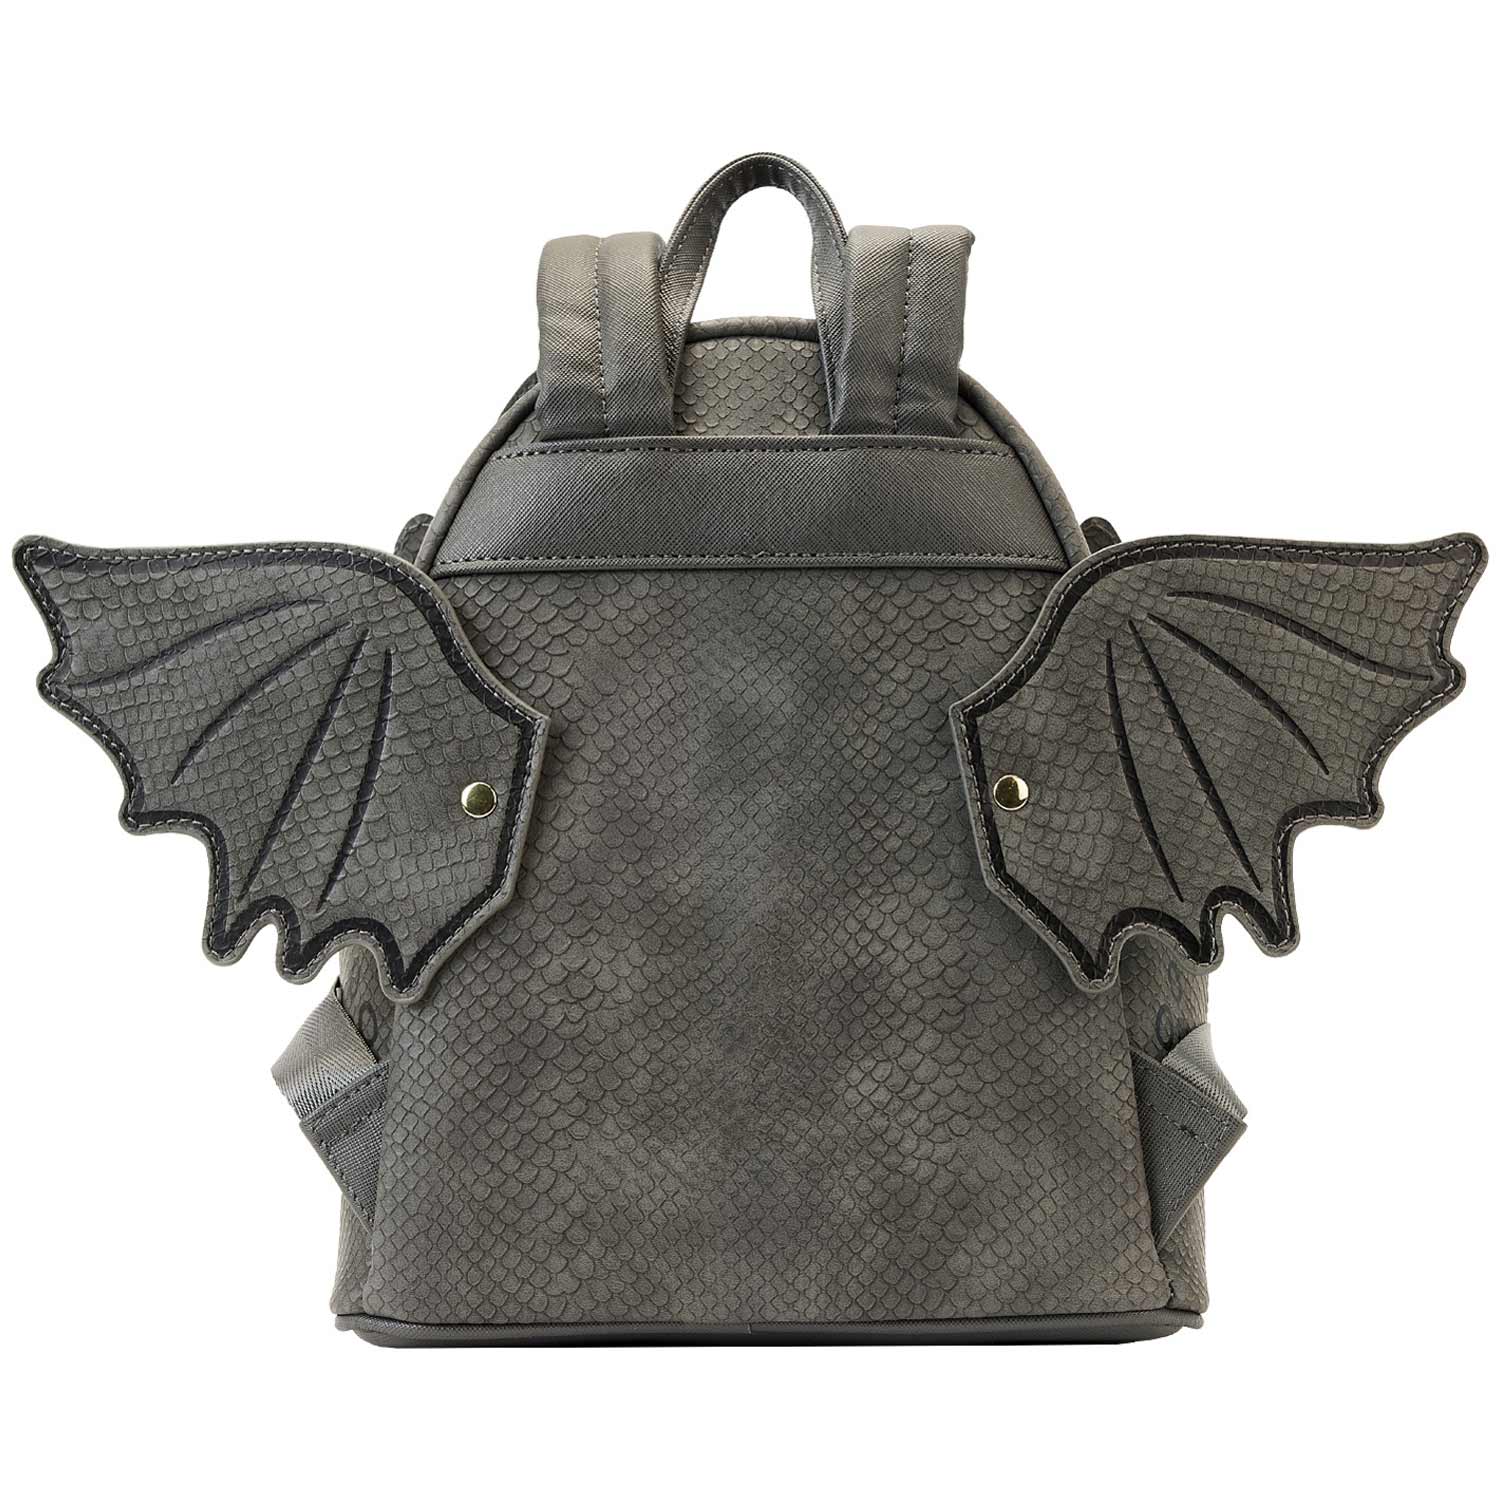 Loungefly x Dreamworks How To Train Your Dragon Toothless Cosplay Mini Backpack - GeekCore